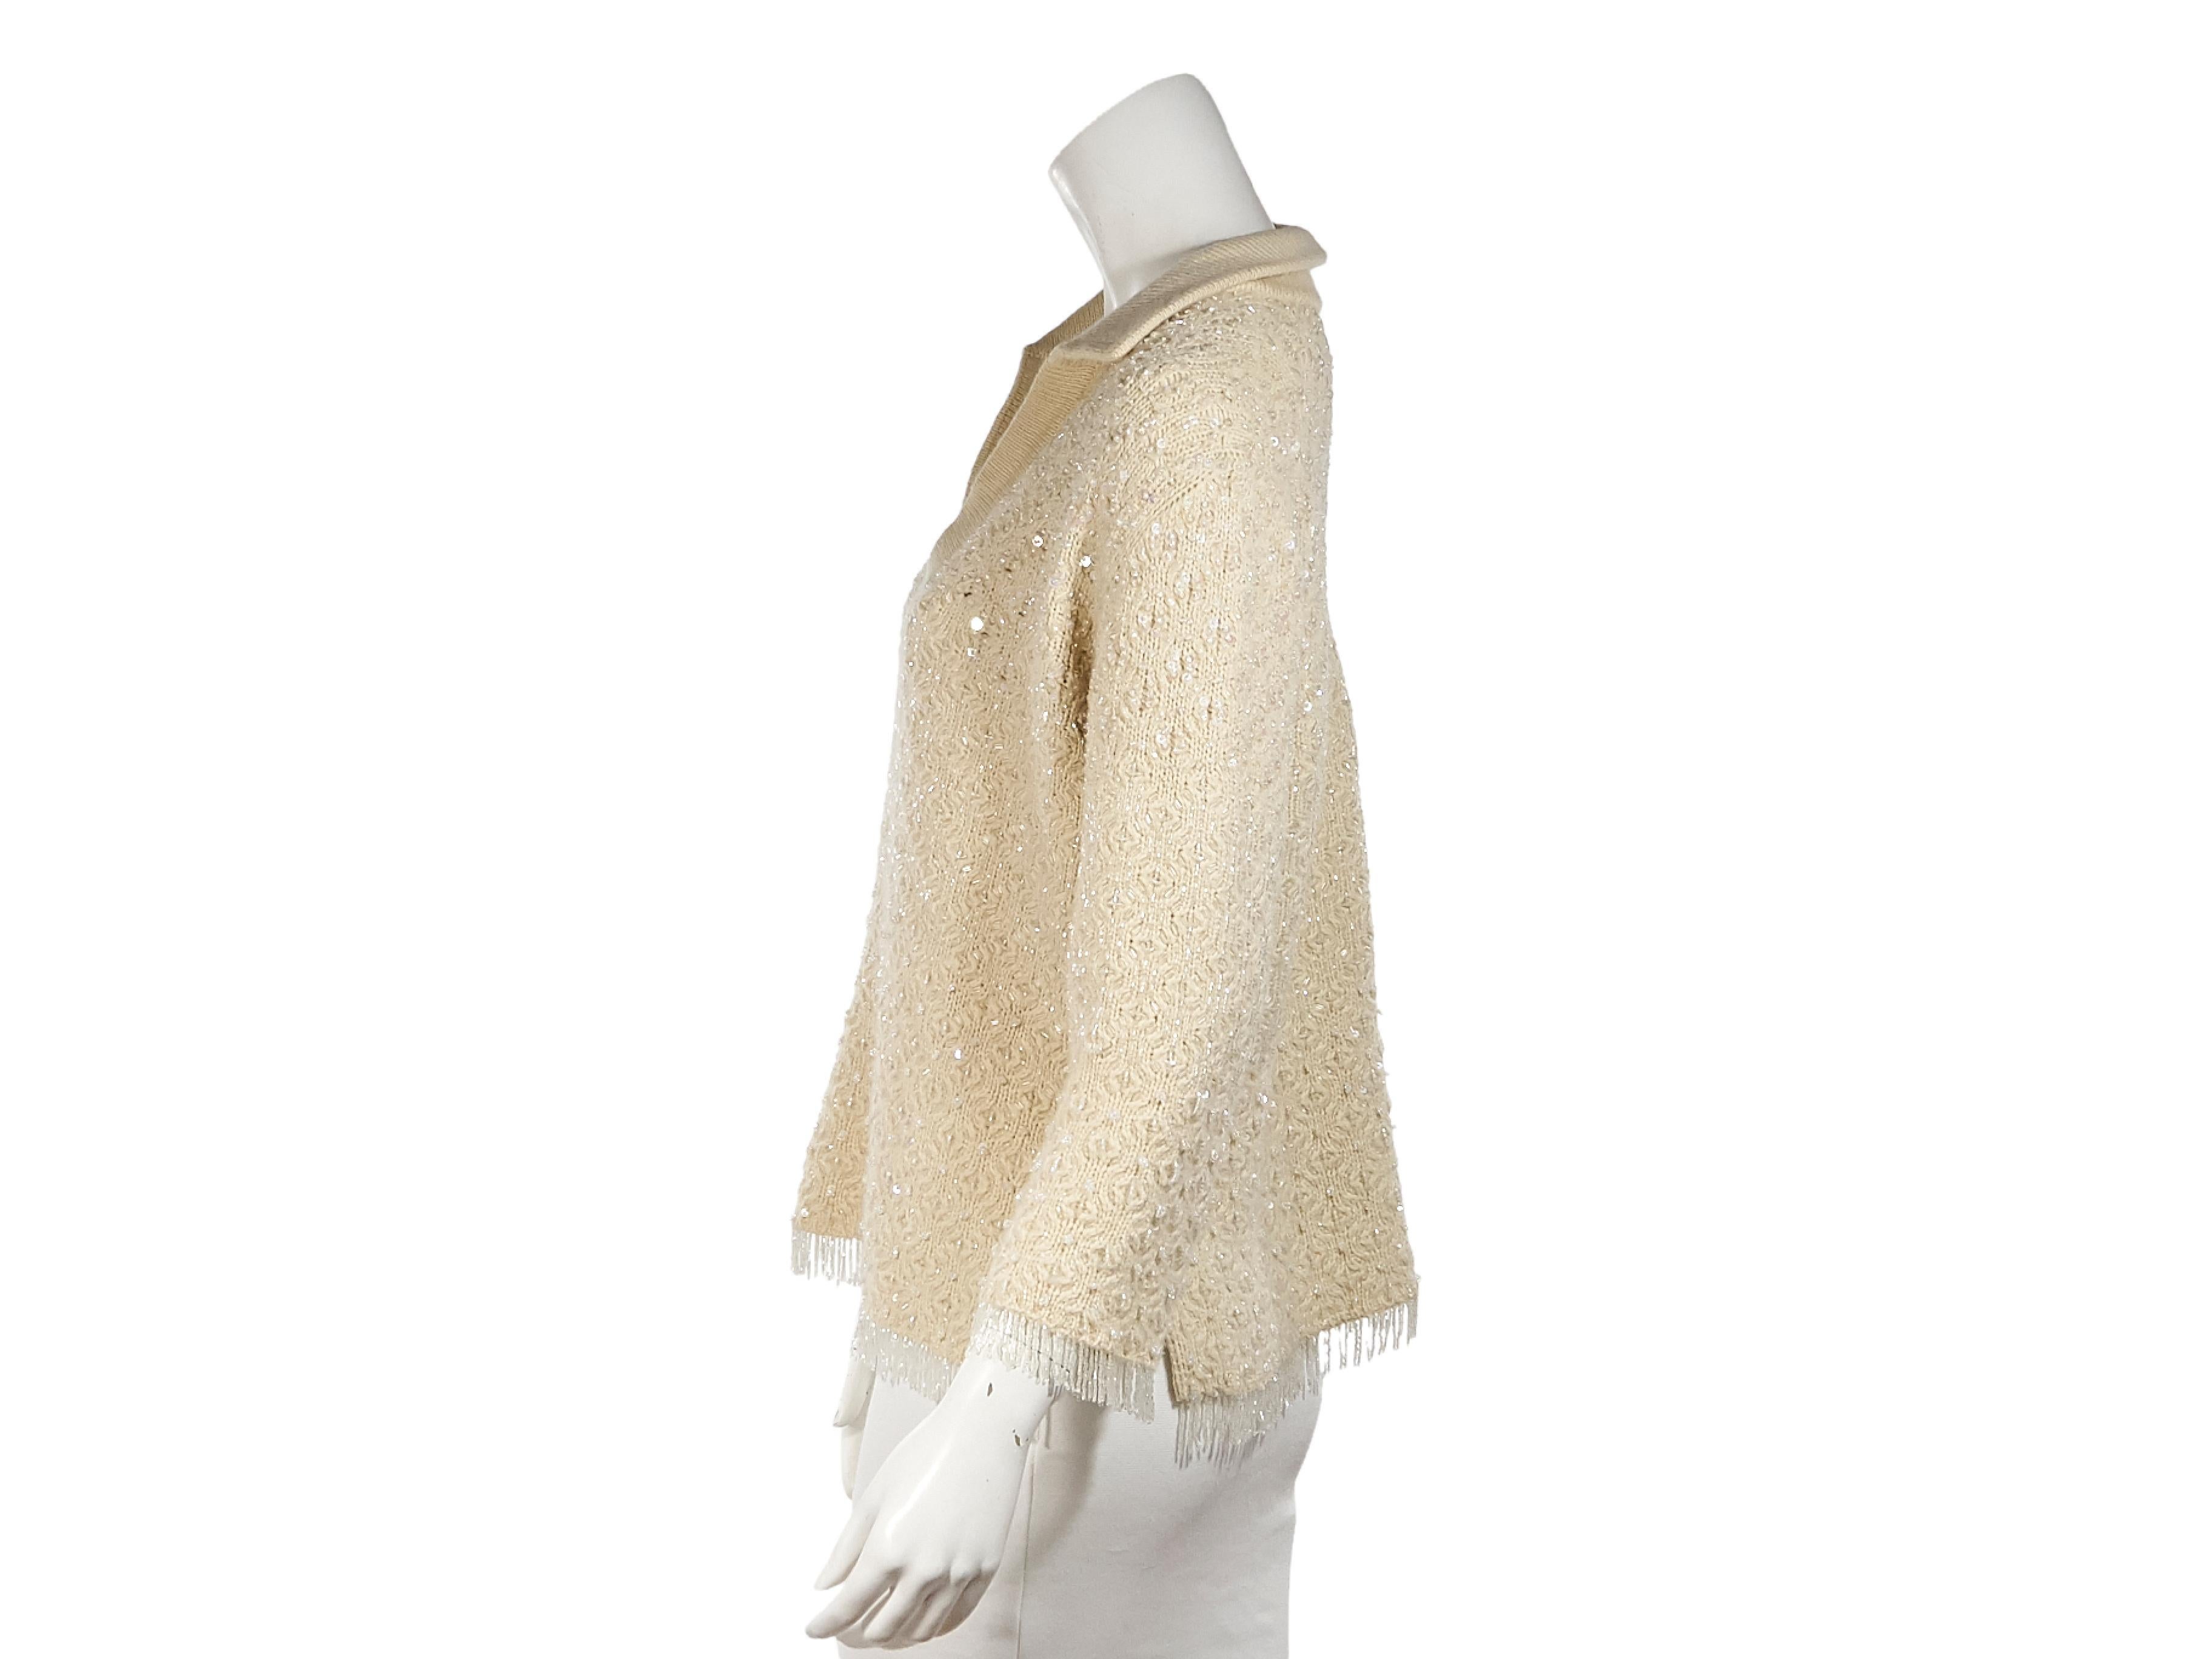 Product details:  Ivory sequined sweater by Oscar de la Renta.  Spread collar.  V-neck.  Long sleeves.  Beaded fringe cuffs and hem.  Pullover style.  36